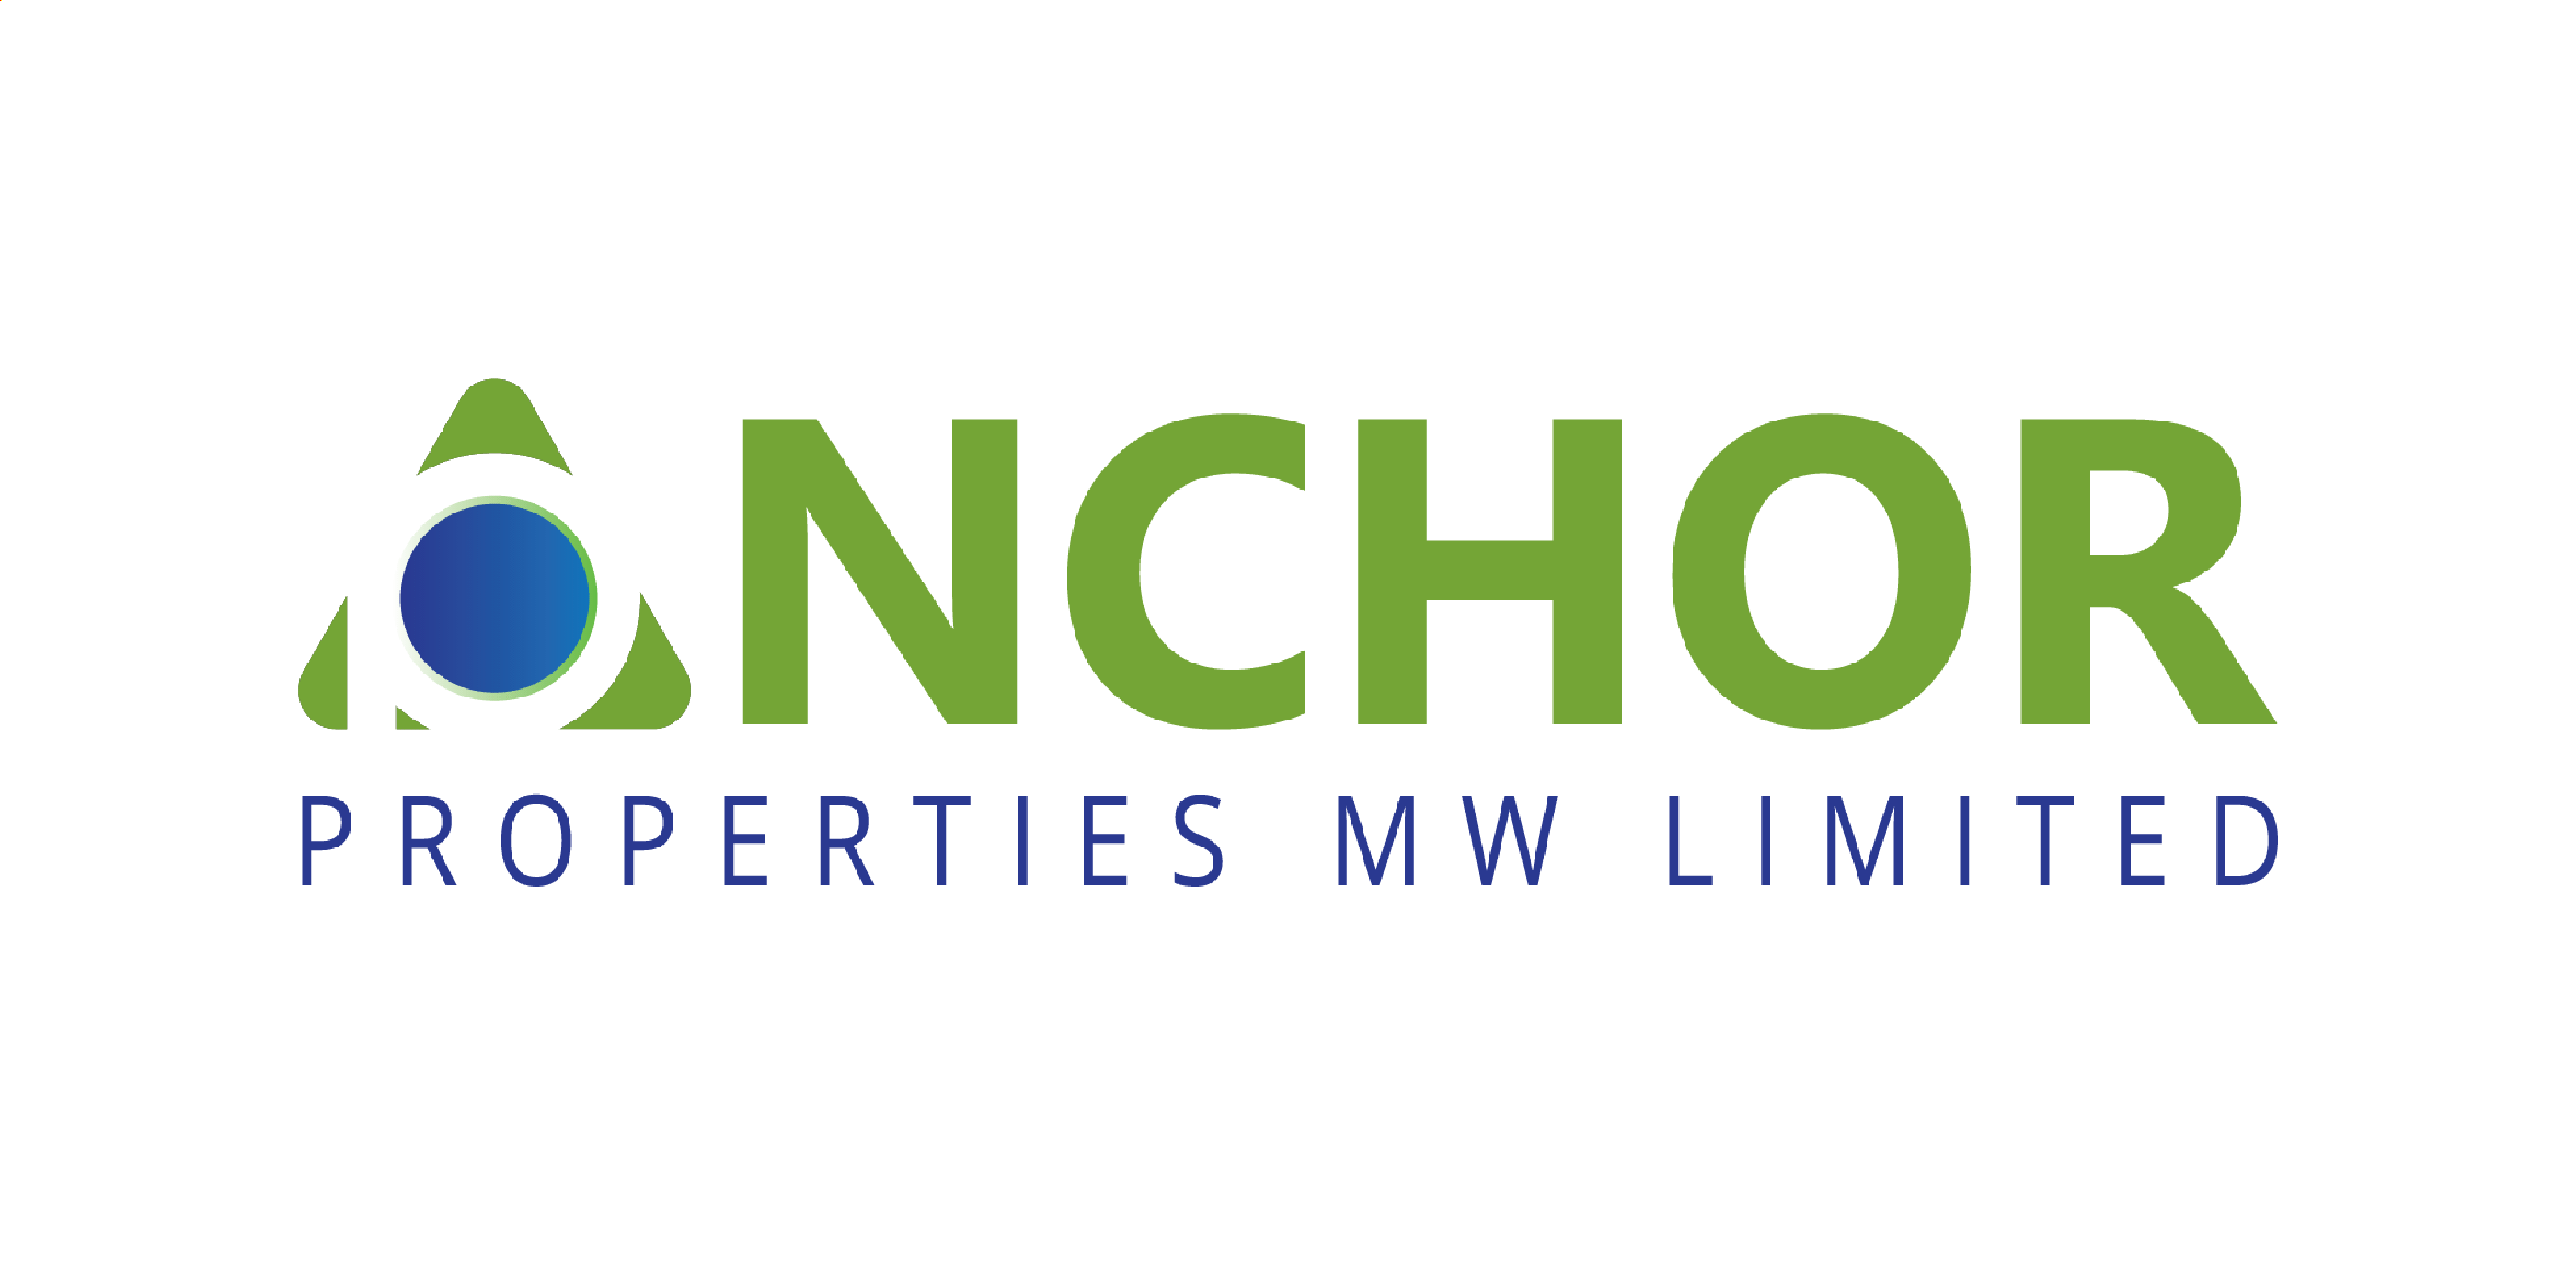 Anchor properties mw limited